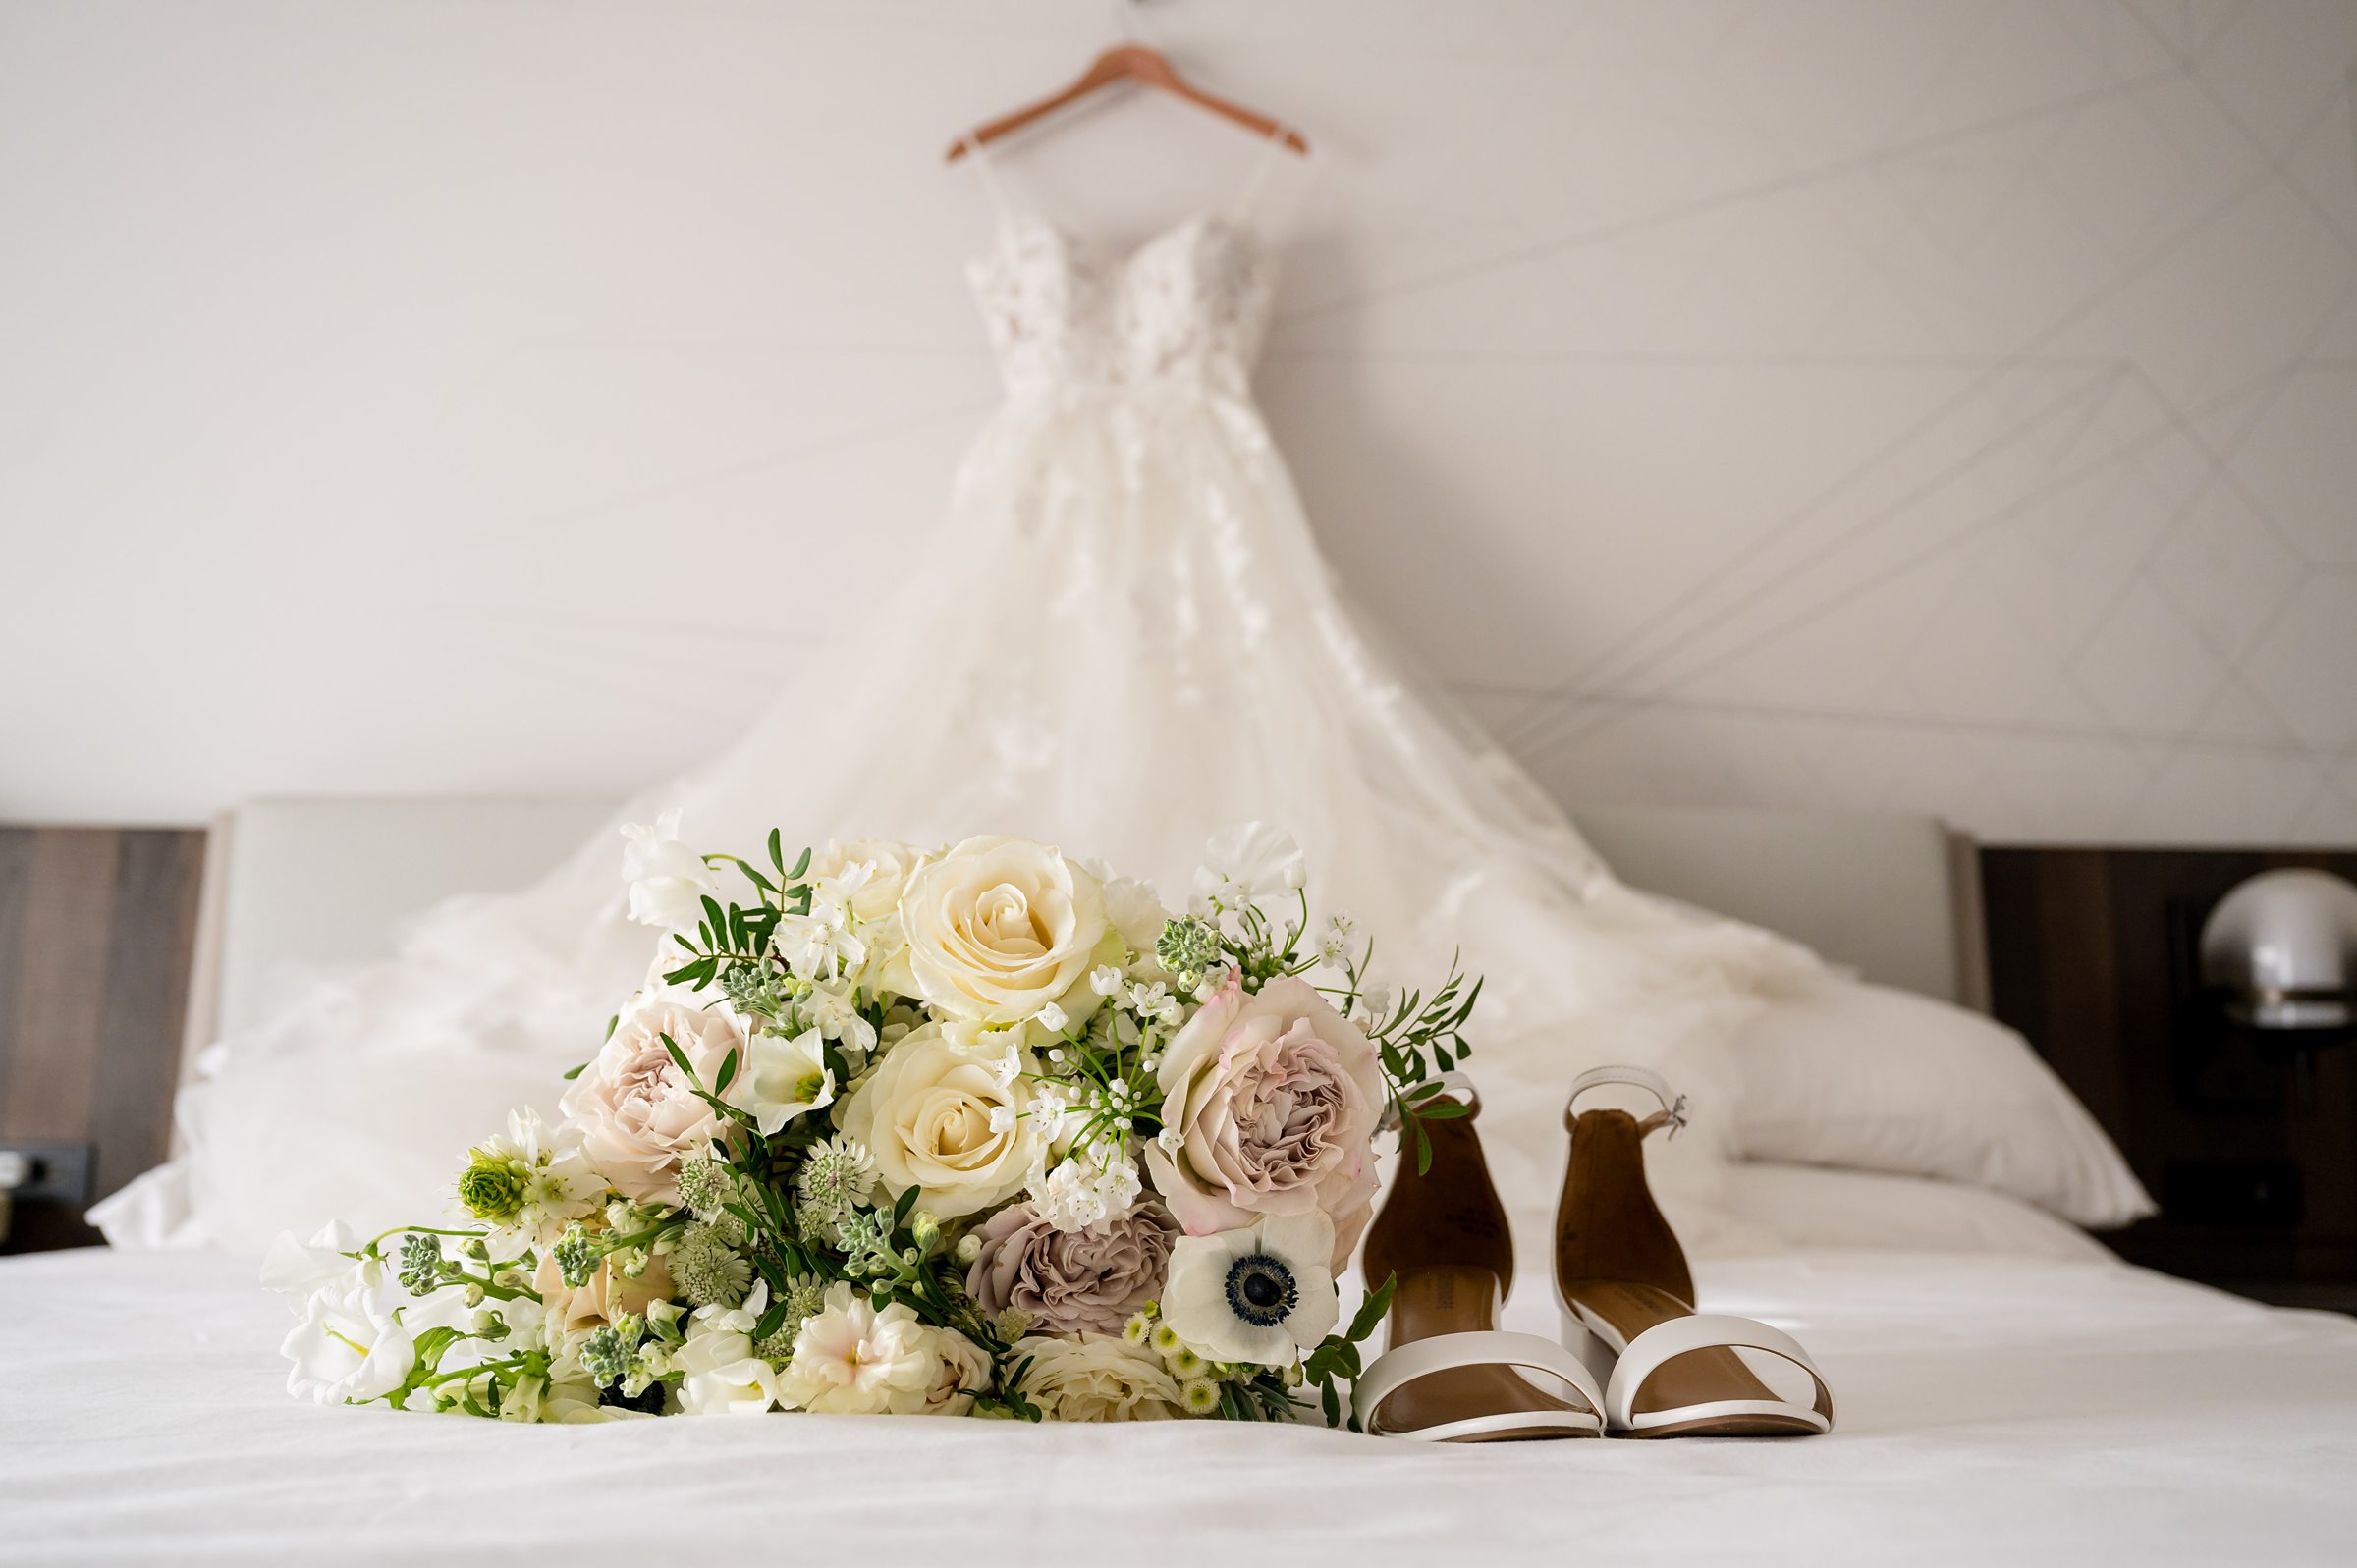 A wedding dress, bouquet, and shoes are elegantly displayed on the bed at a Lilah Events wedding.